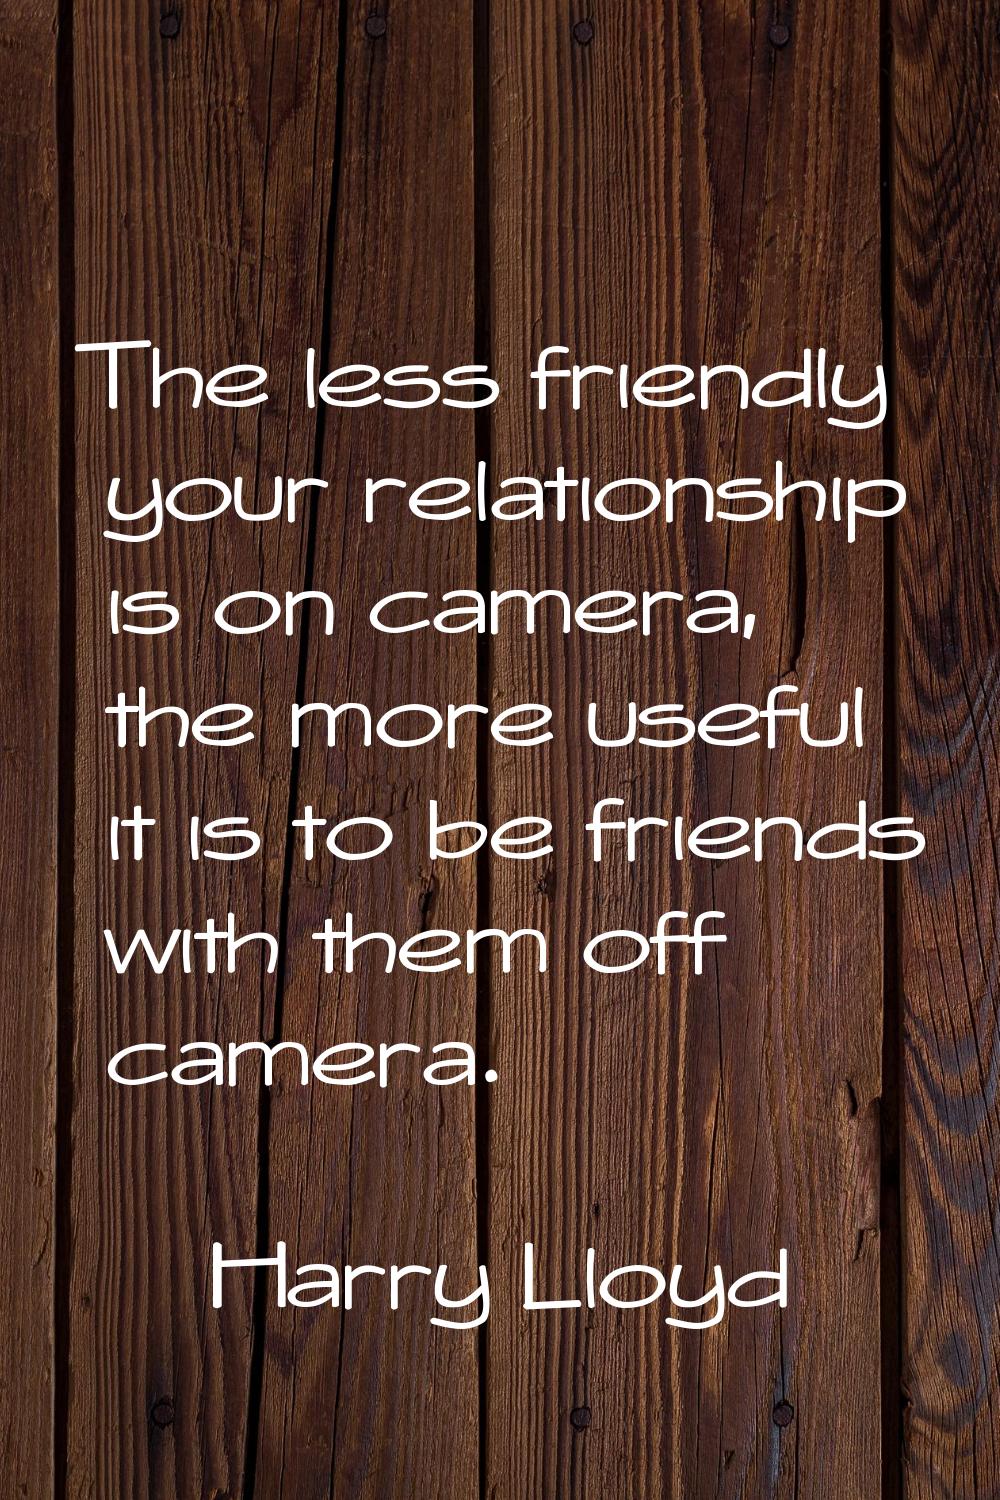 The less friendly your relationship is on camera, the more useful it is to be friends with them off